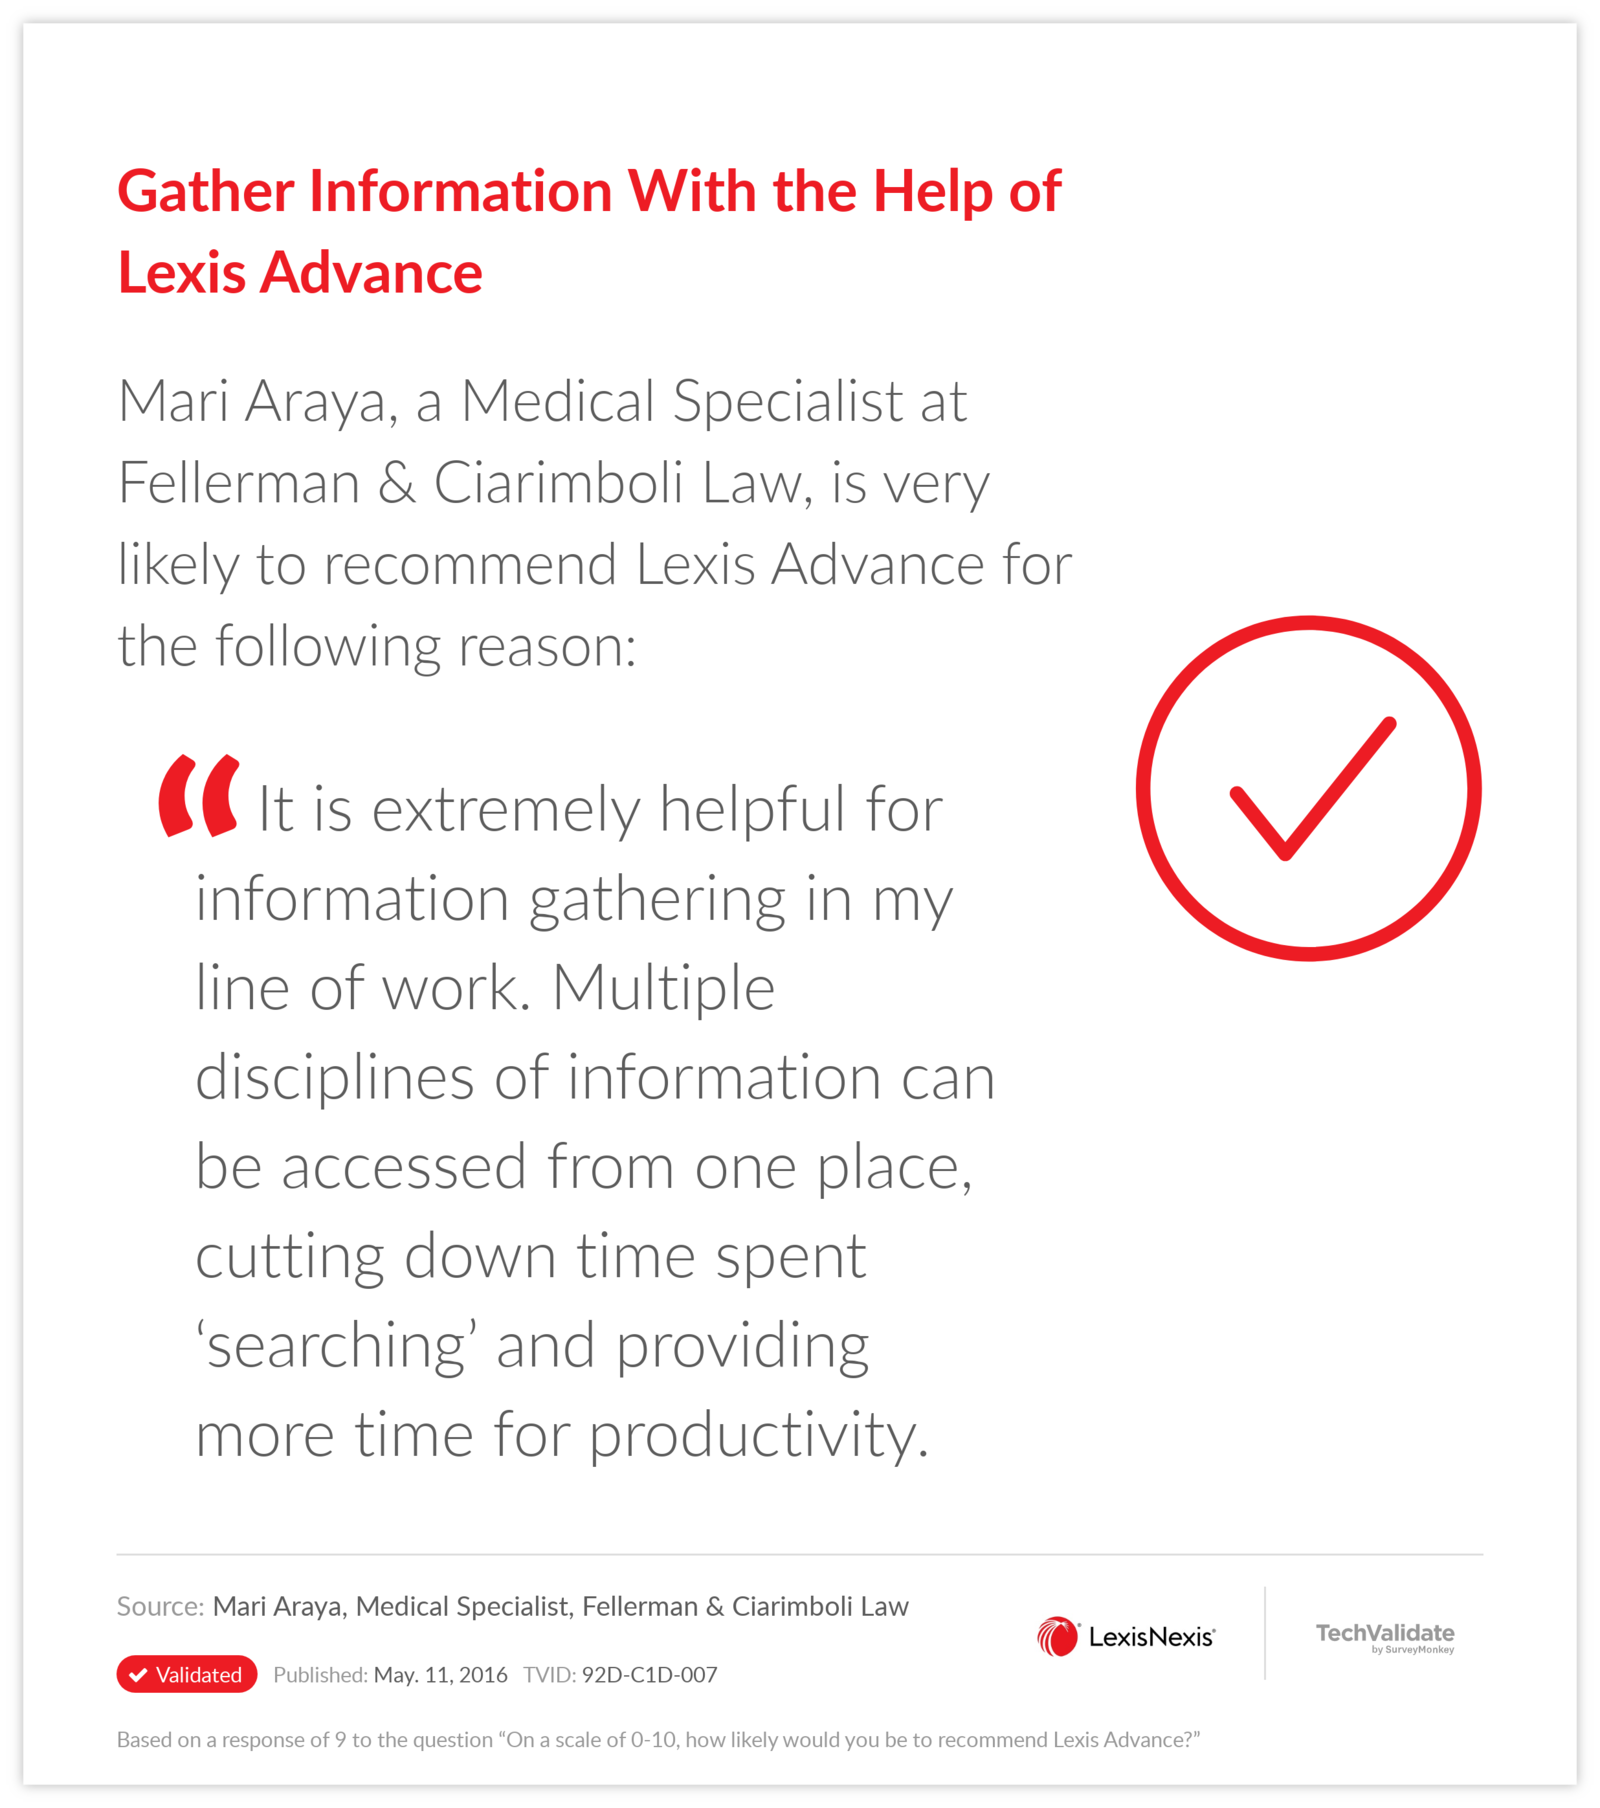 Gather Information With the Help of Lexis Advance